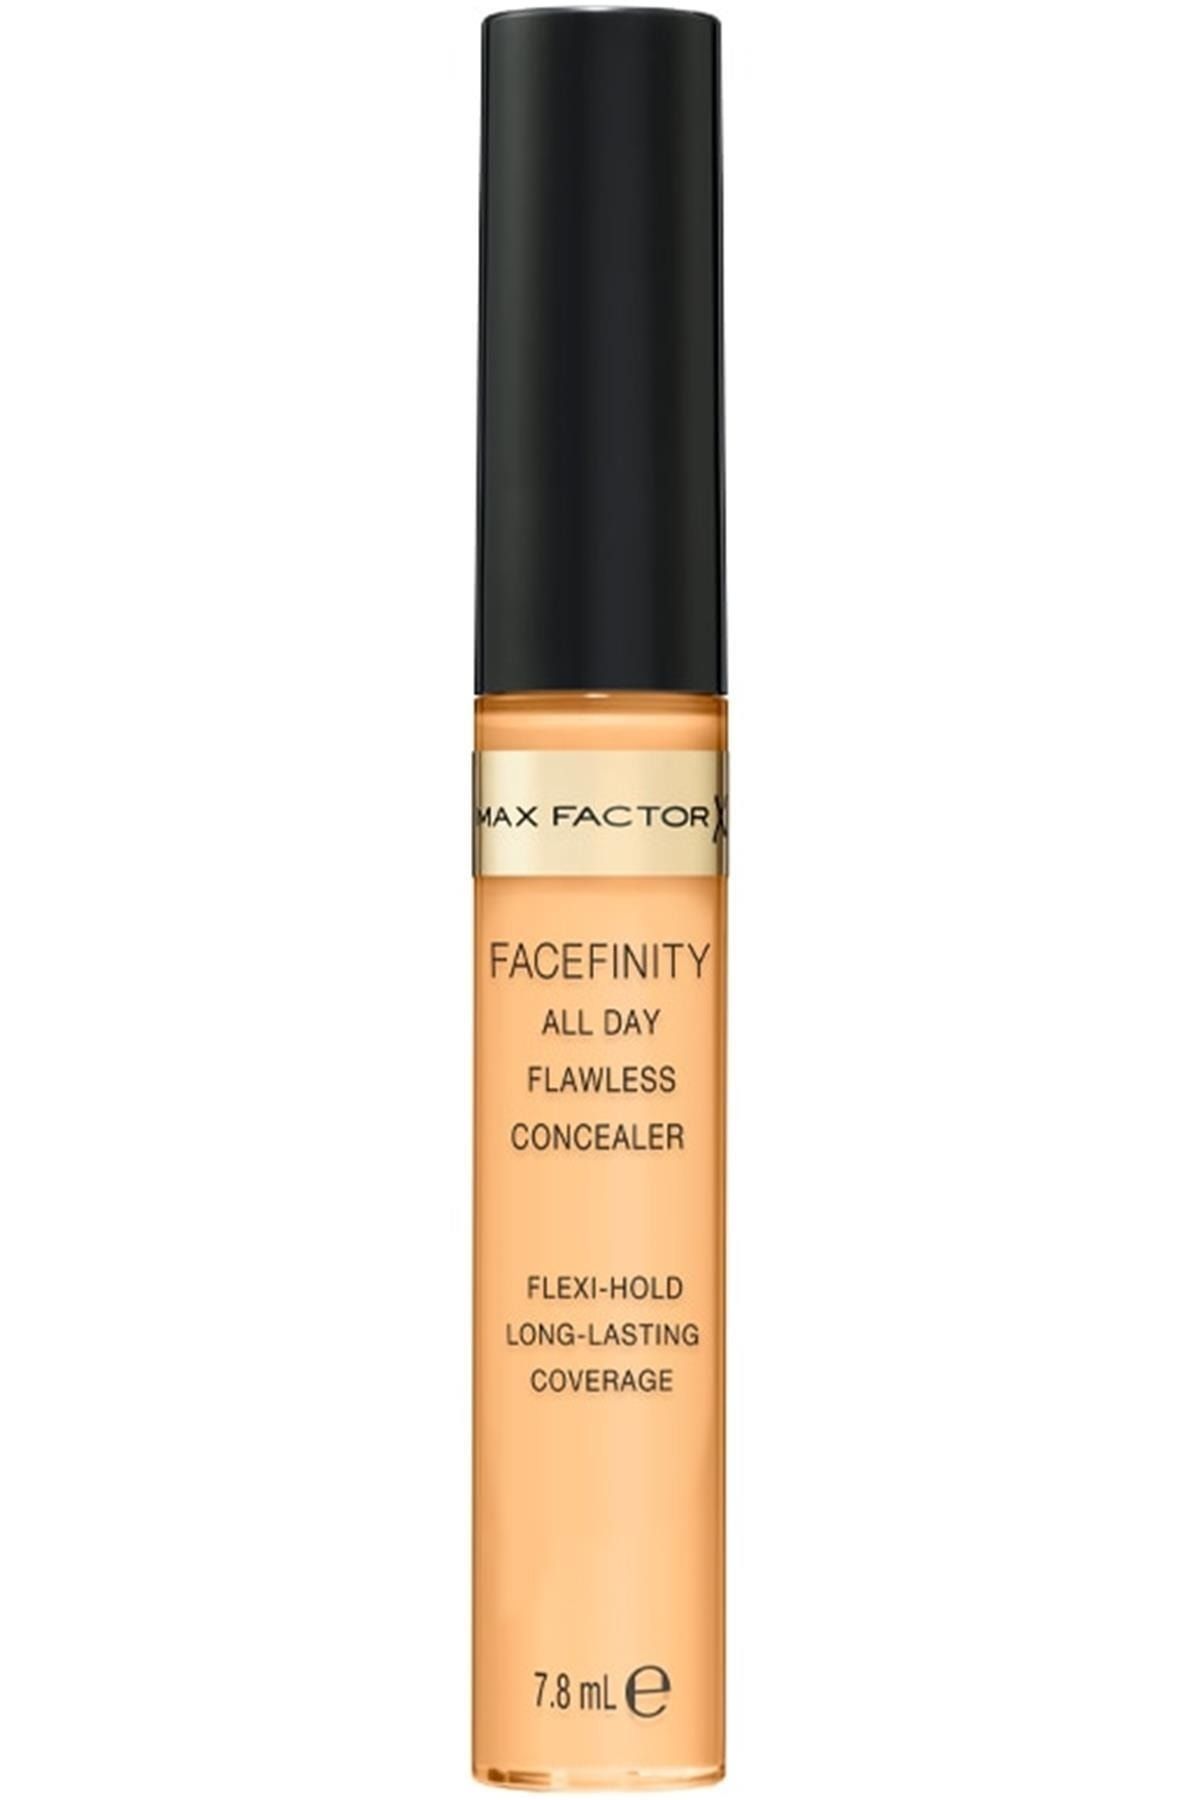 Max Factor Facefinity All Day Flawless Kapatıcı No 40 7.8 ml